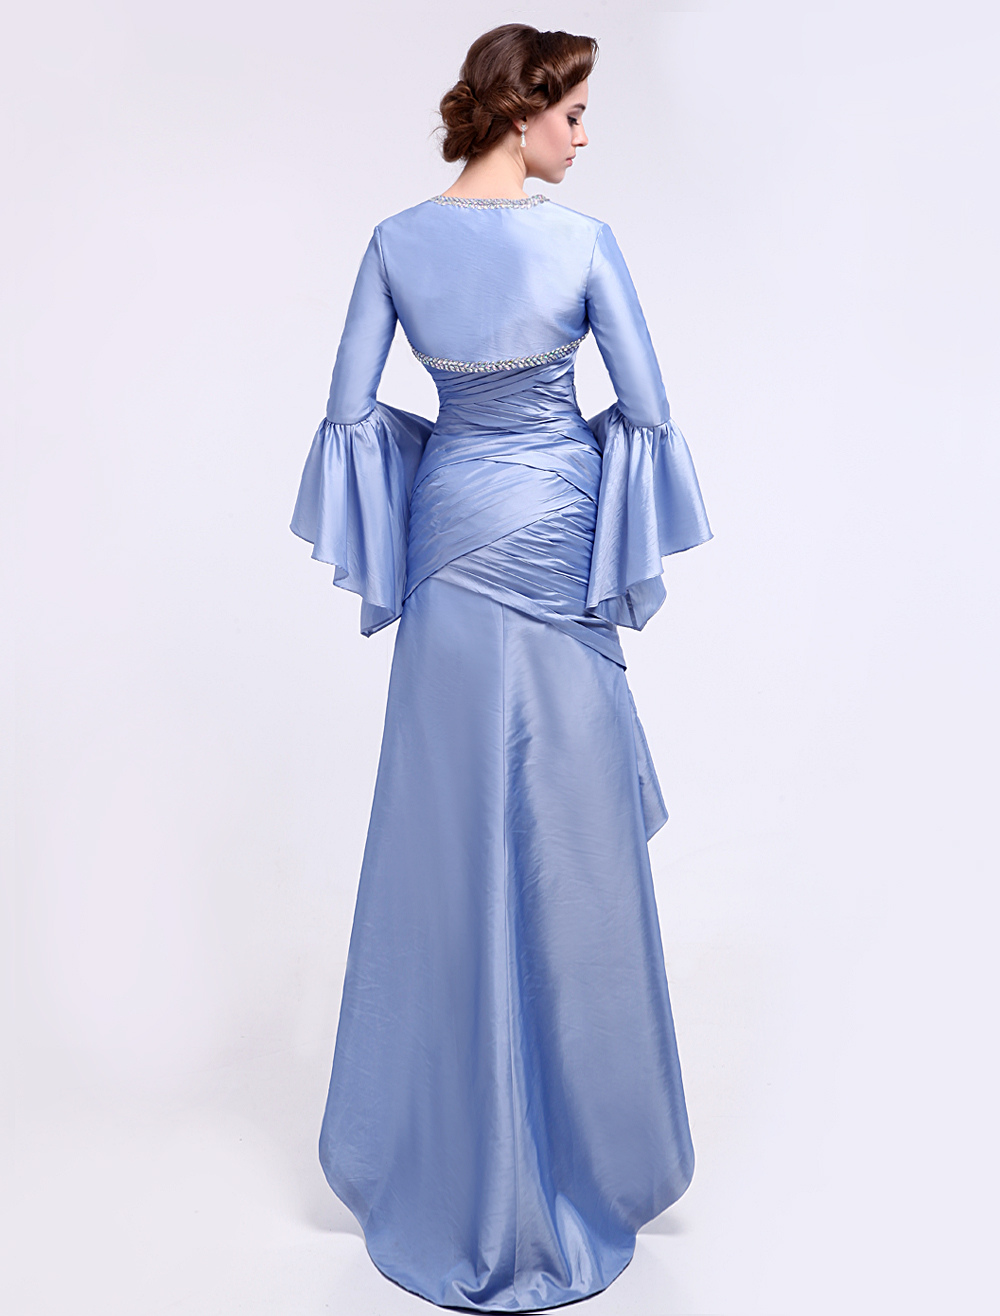 Baby Blue Evening Dress Ruched 2 Piece Mother of the Bride Dress ...